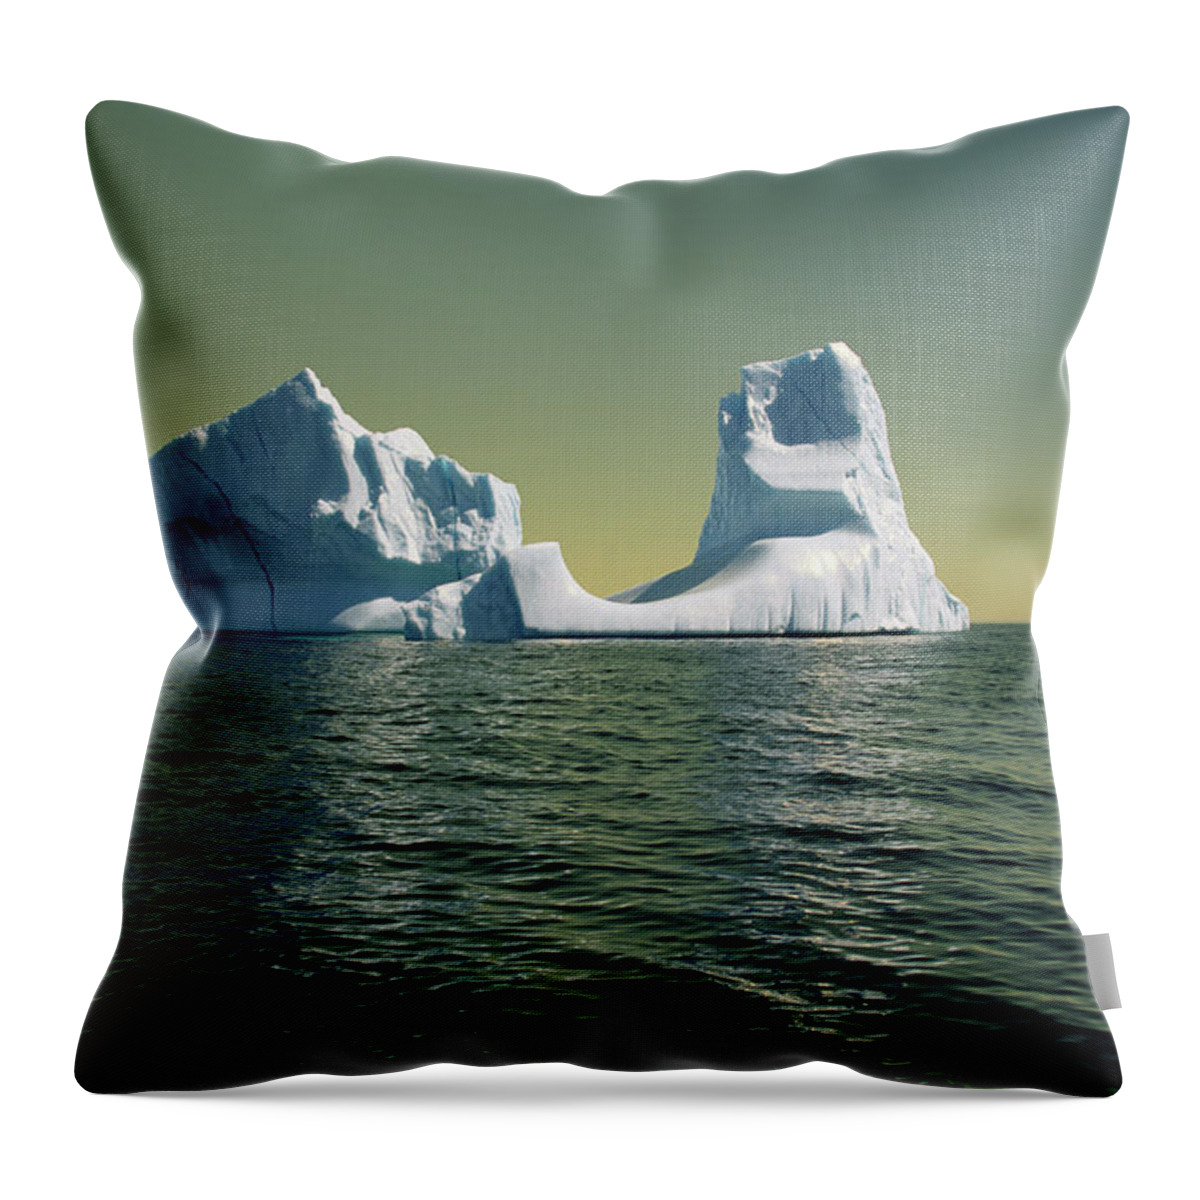 00342146 Throw Pillow featuring the photograph Iceberg in the Labrador Sea by Yva Momatiuk John Eastcott